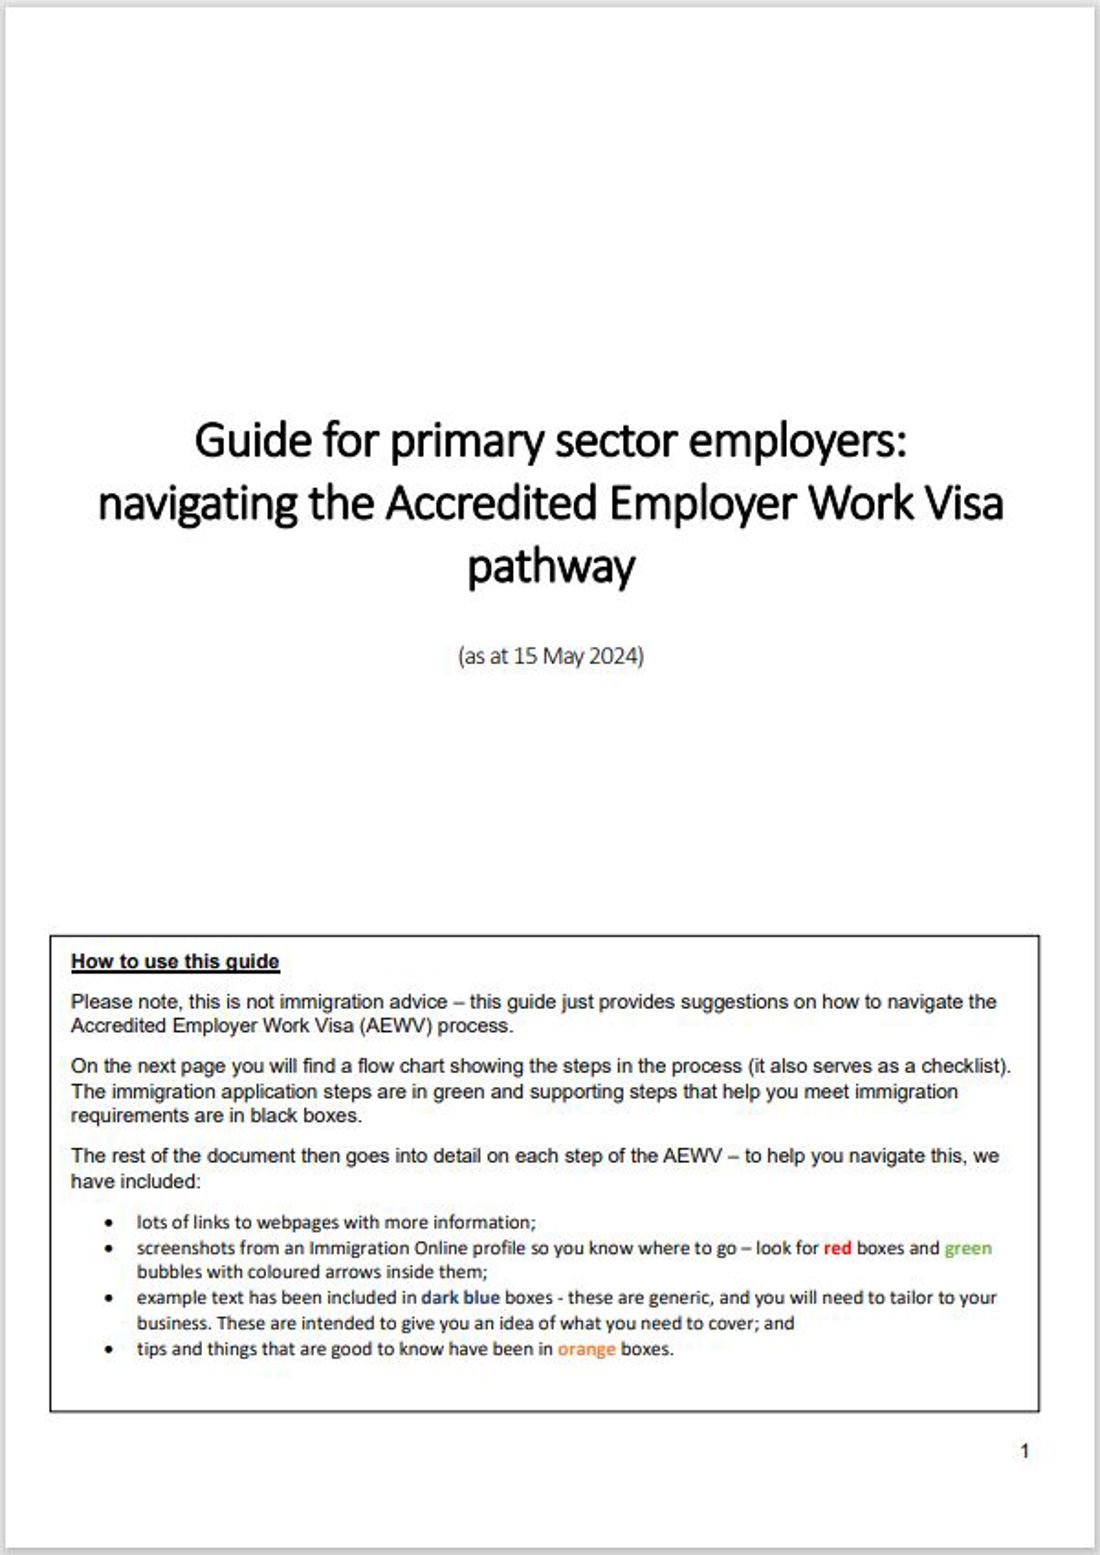 Accredited Employer Work Visa Guide Image